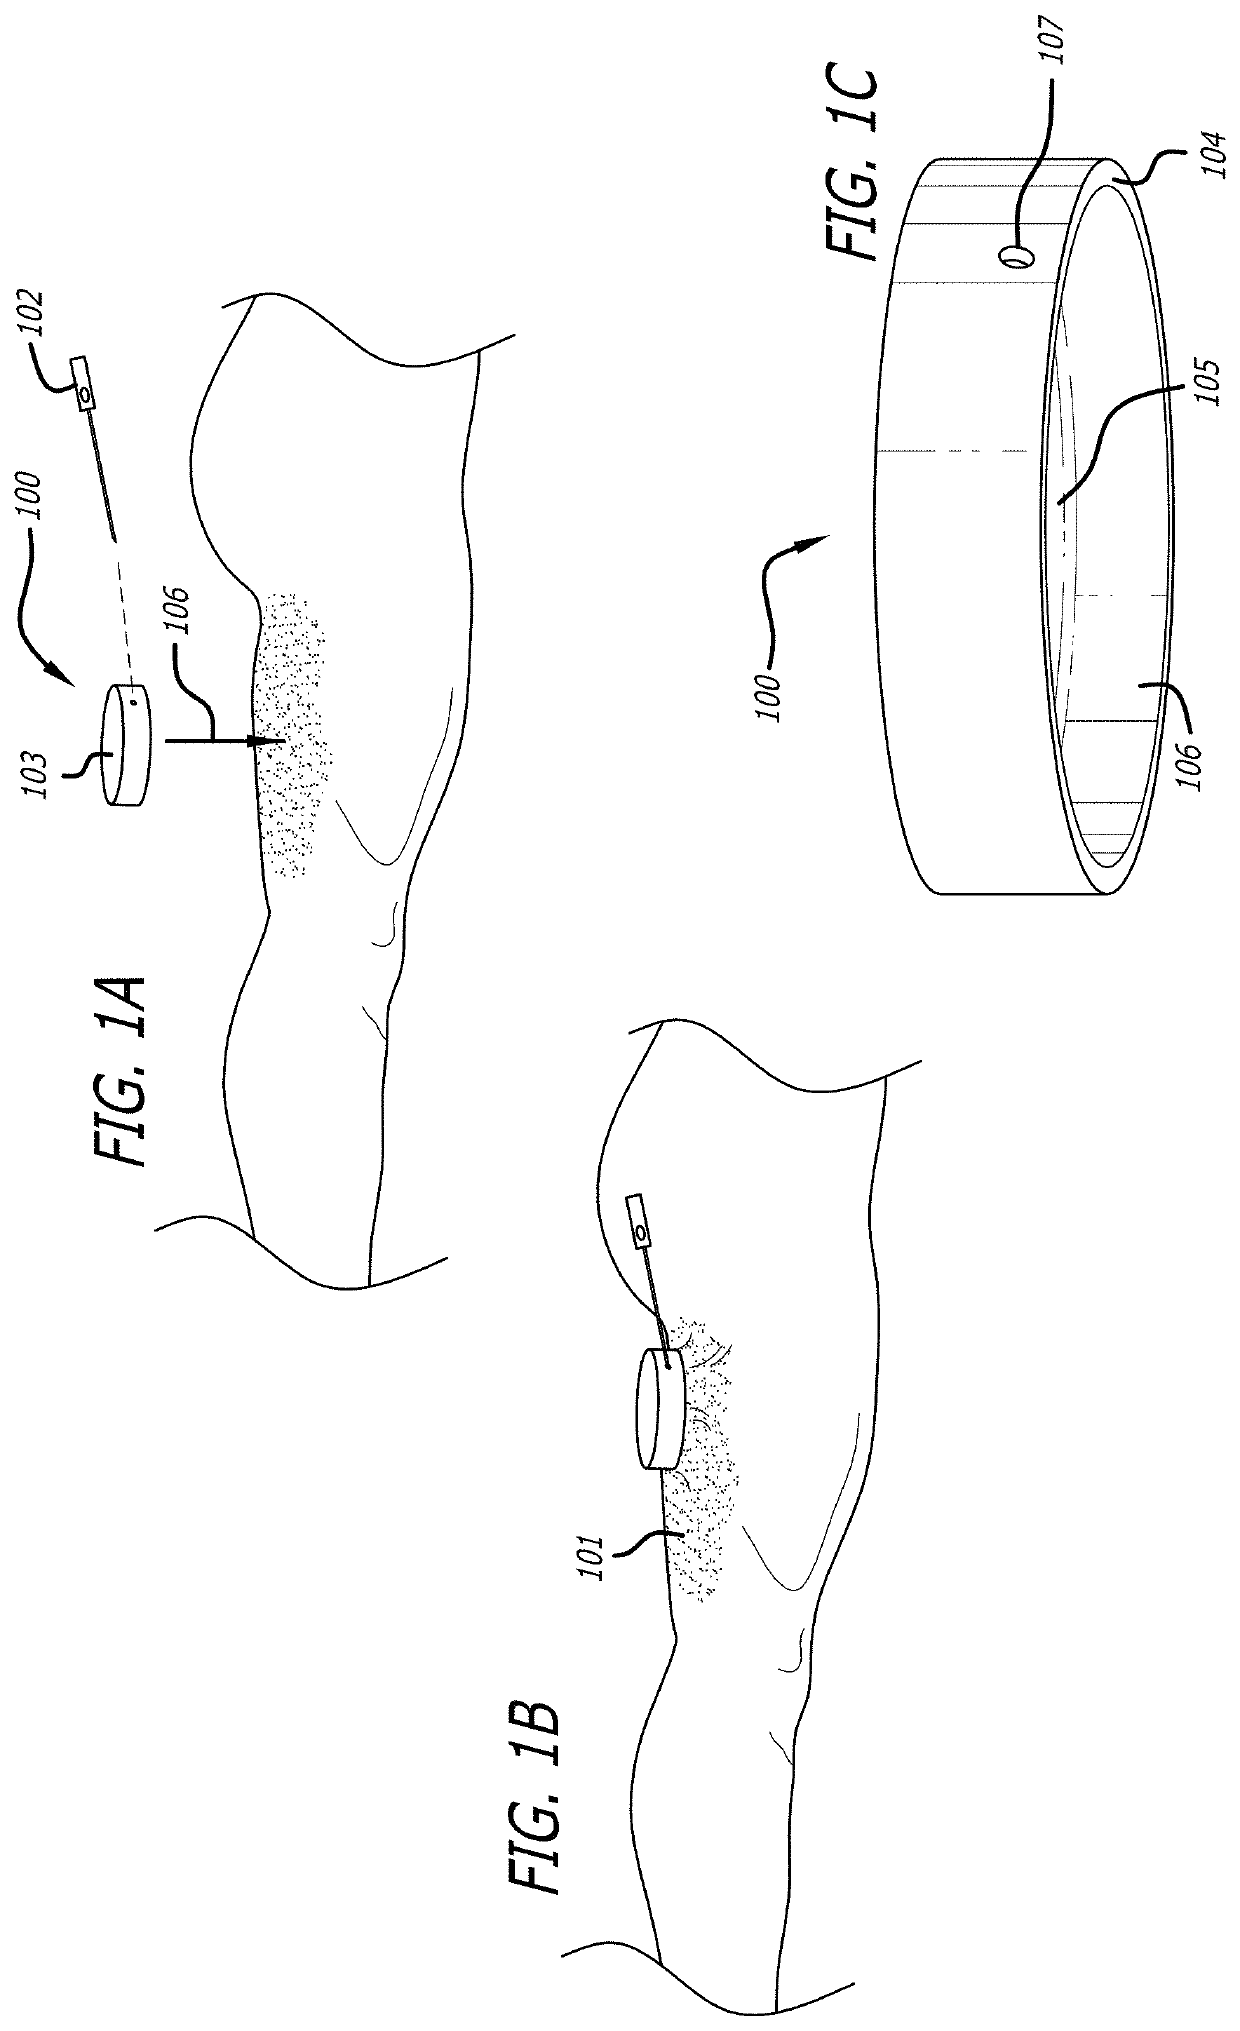 Devices and methods for performing subcutaneous surgery